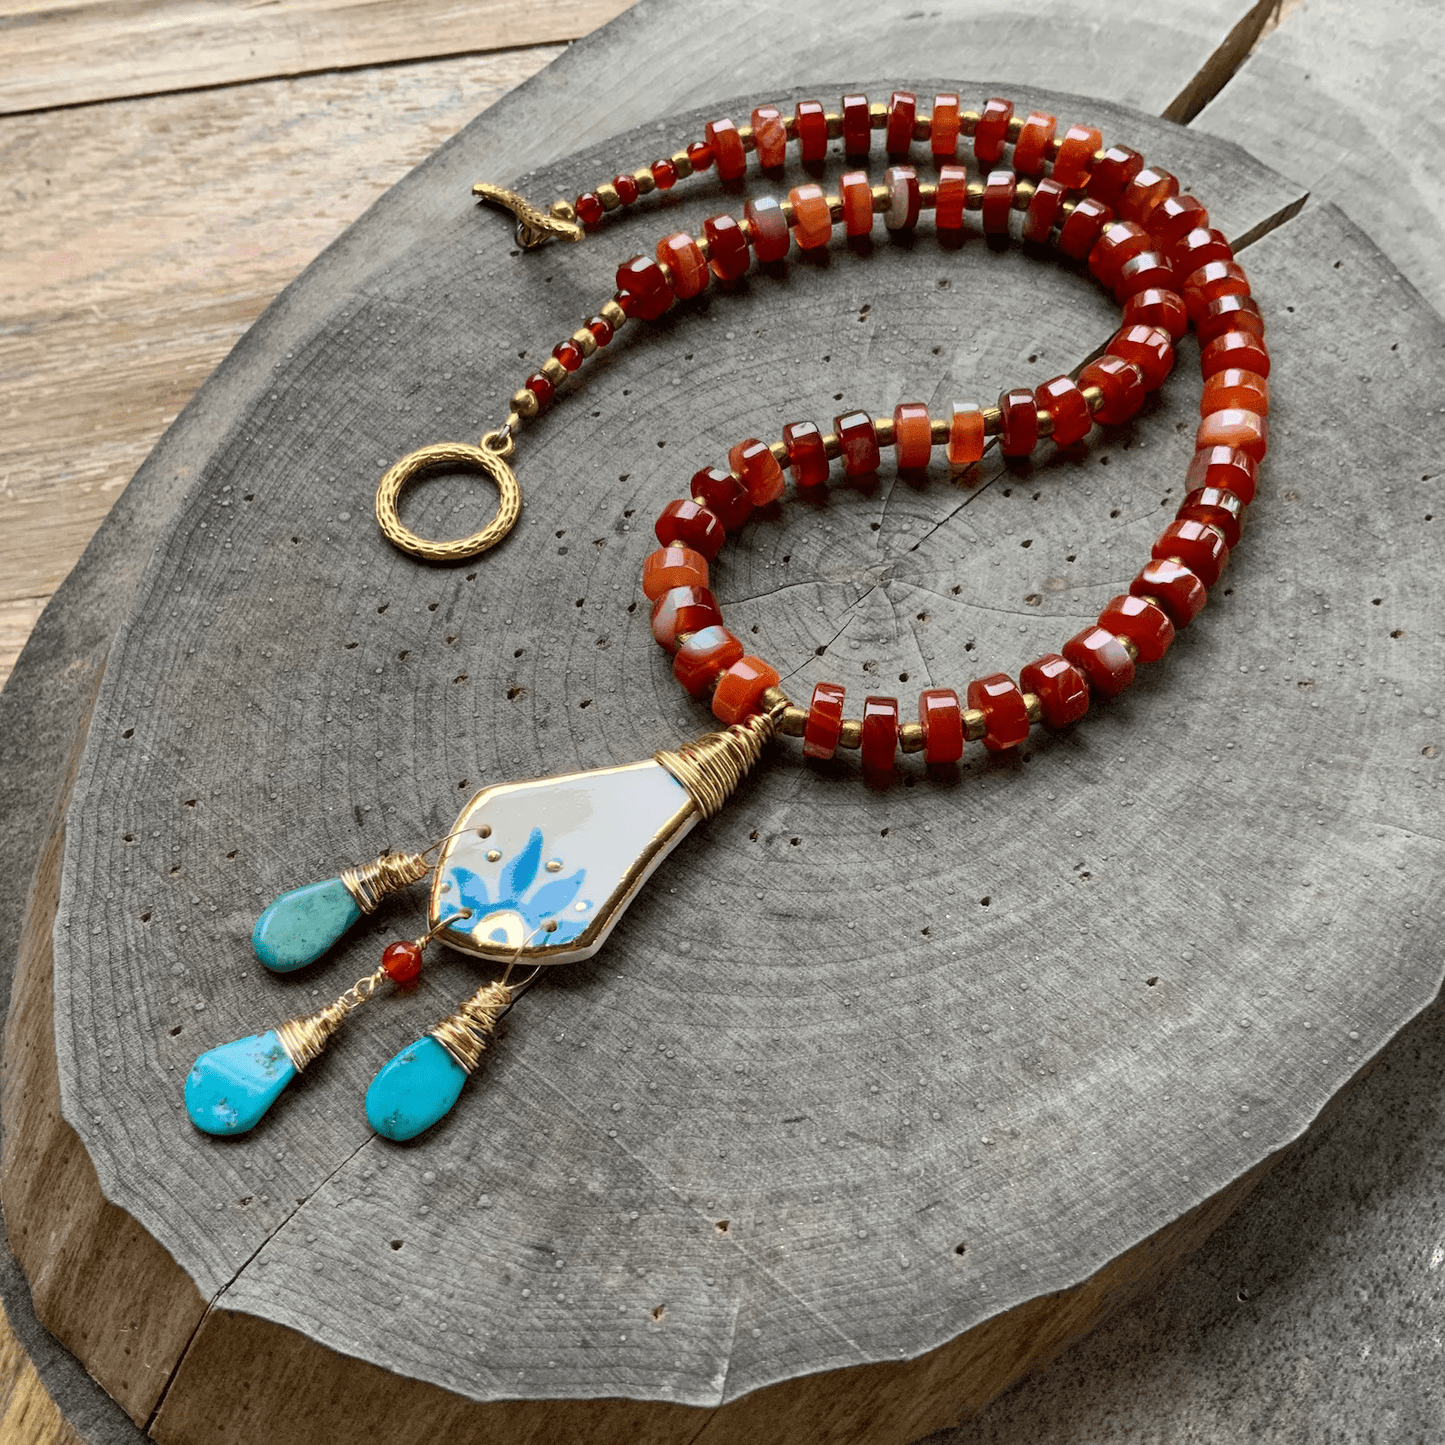 Folk art ceramic pendant and Carnelian necklace, Mexican pottery inspired